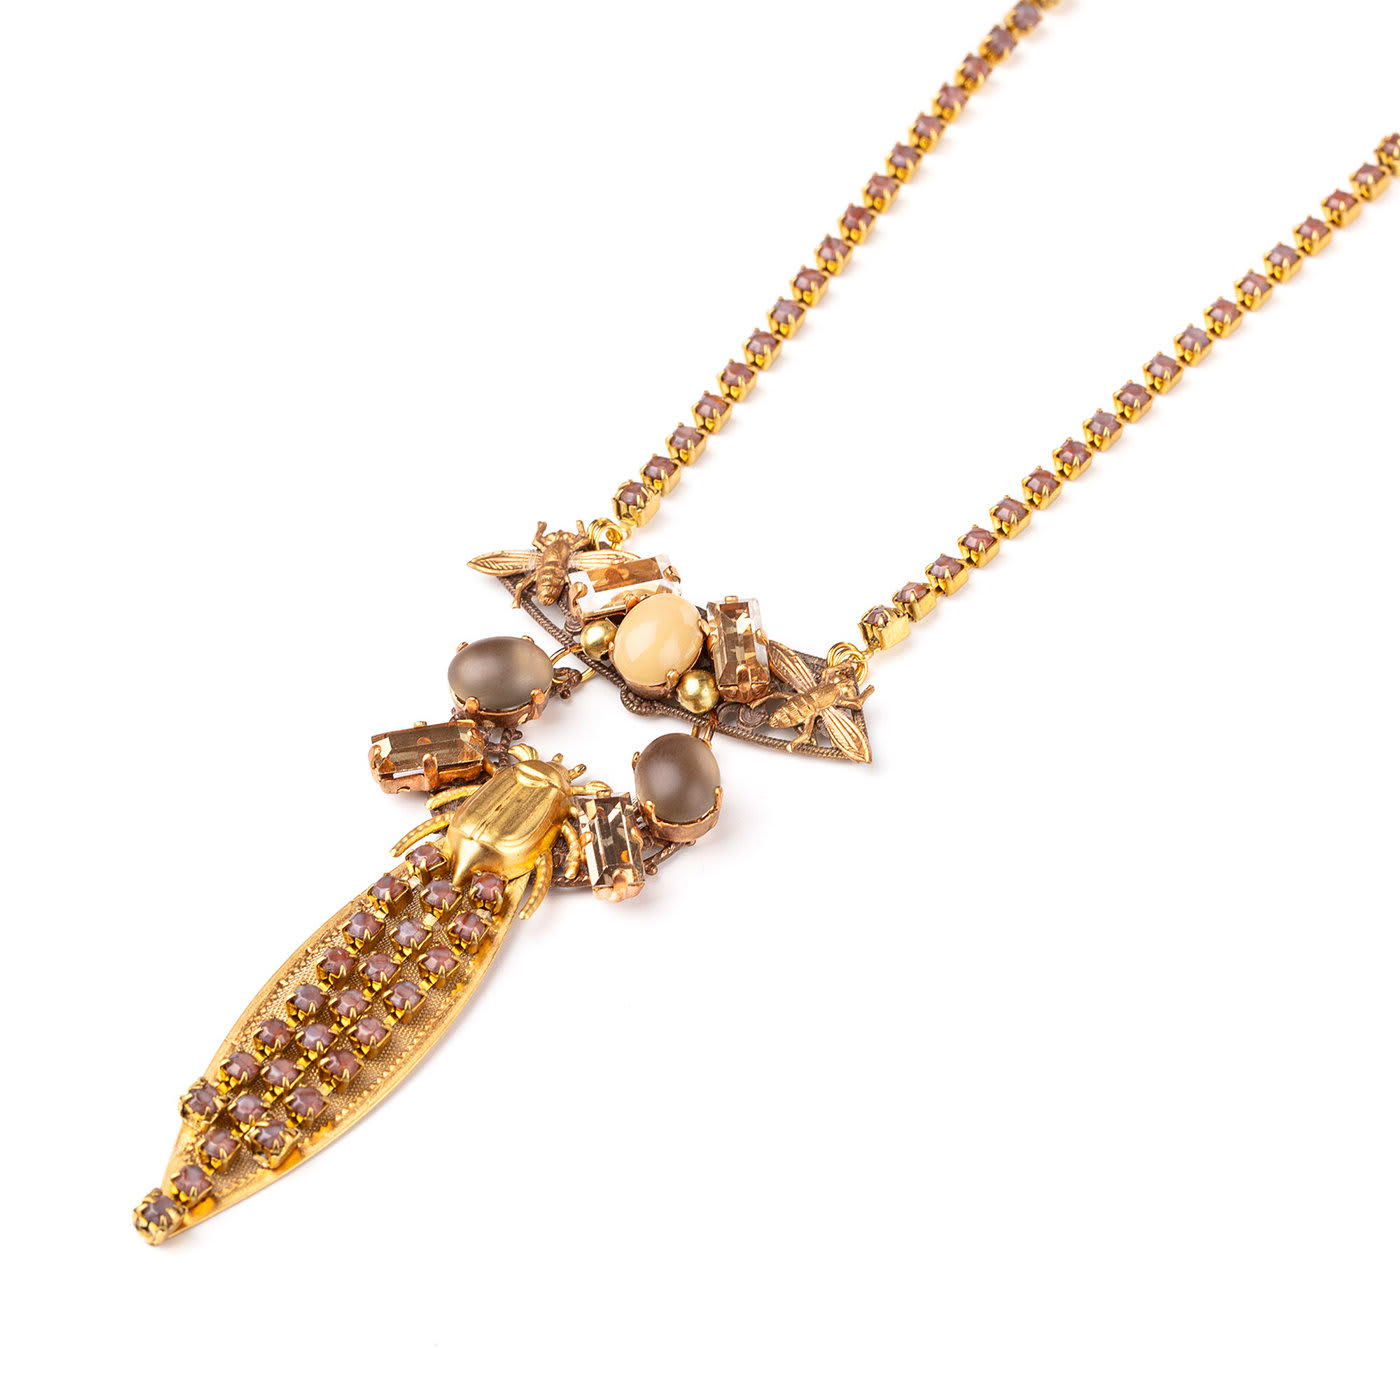 Long Fregene necklace with insect - Susi Di Re